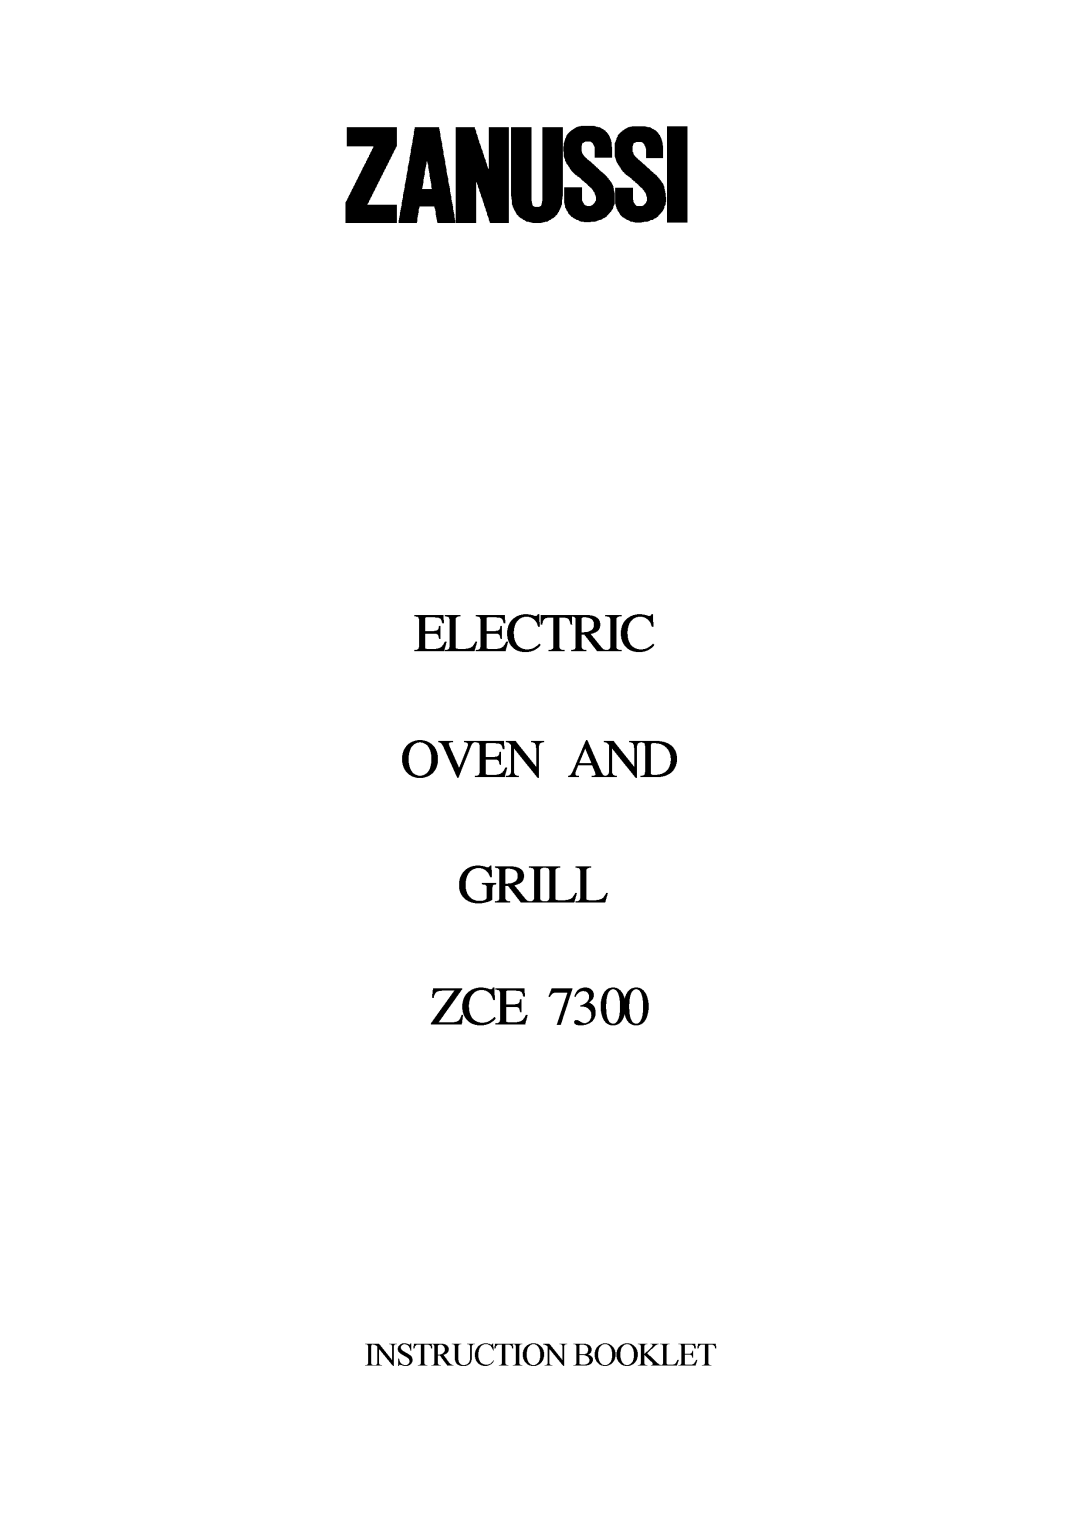 Zanussi manual INSTRUCTIONZCE 7300BOOKLET, Electric Oven And Grill 